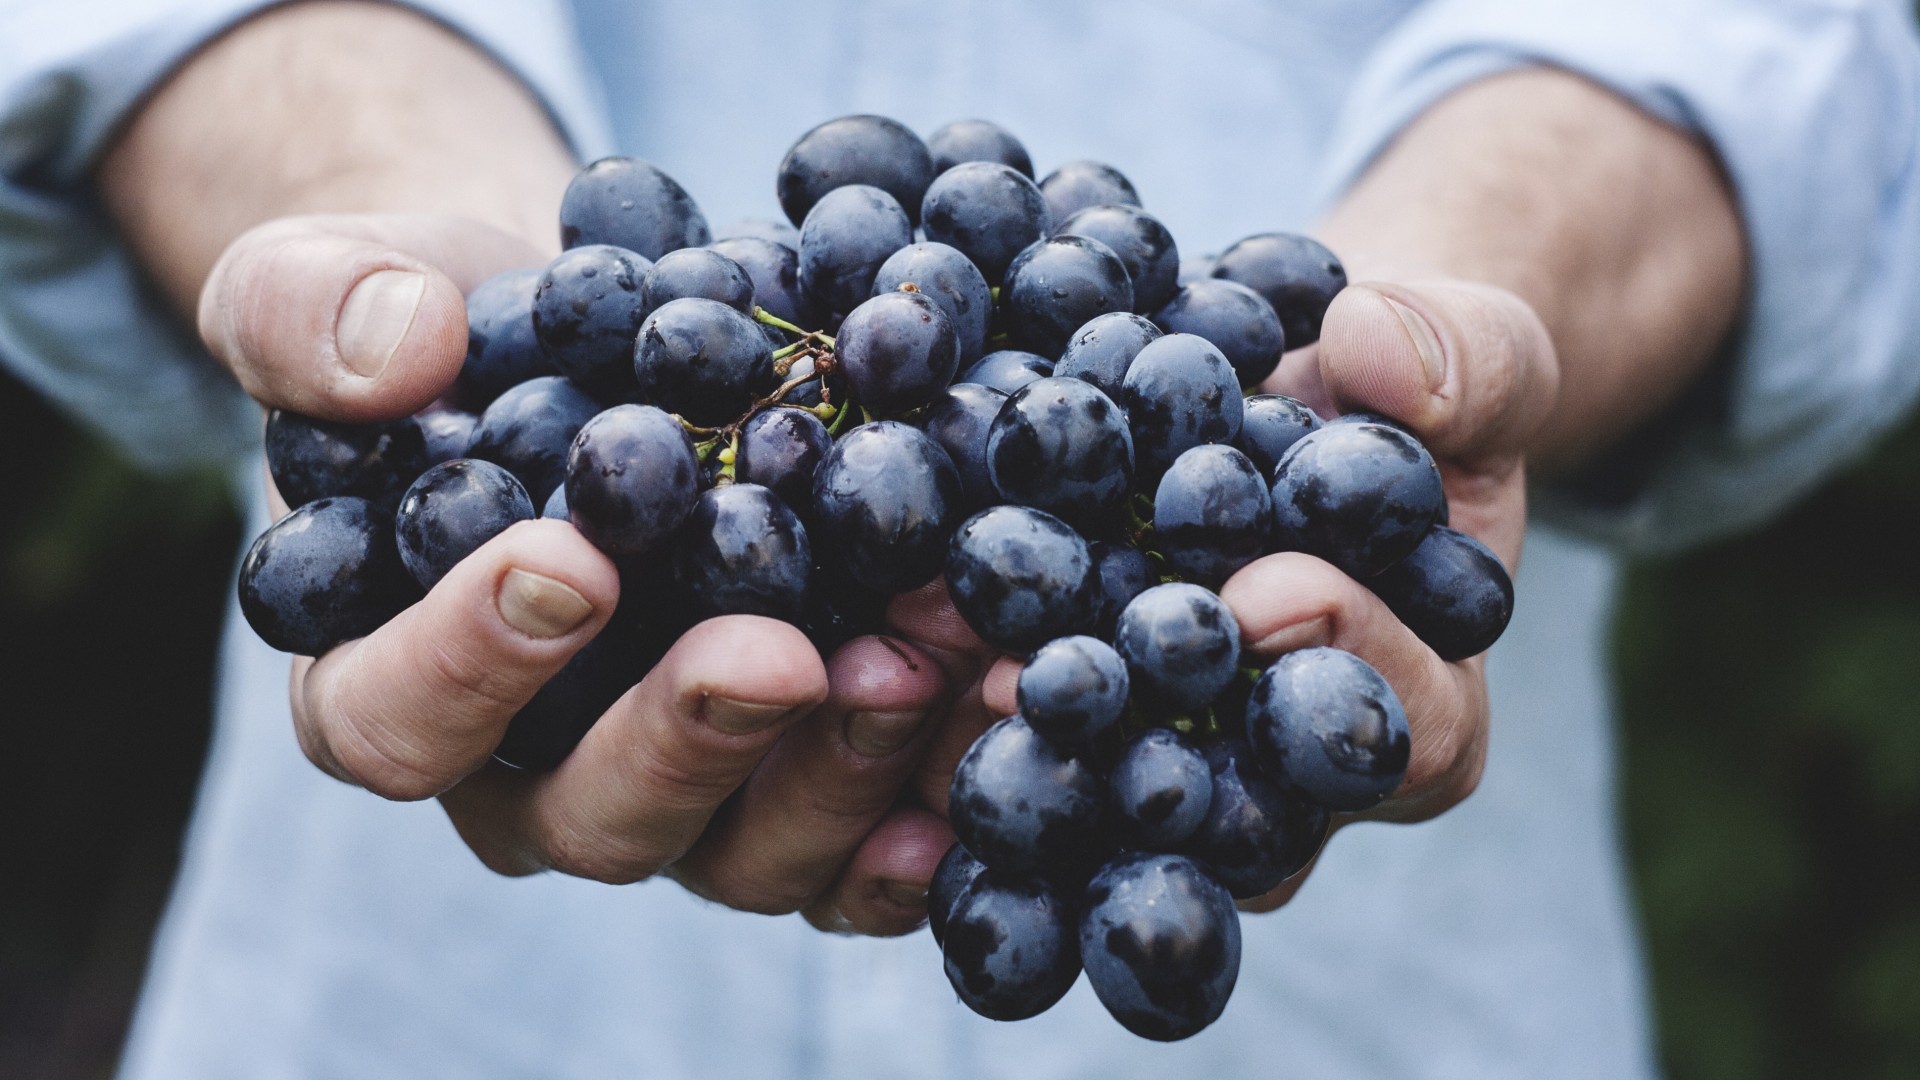 Grapes: Health benefits and nutrition facts | Live Science